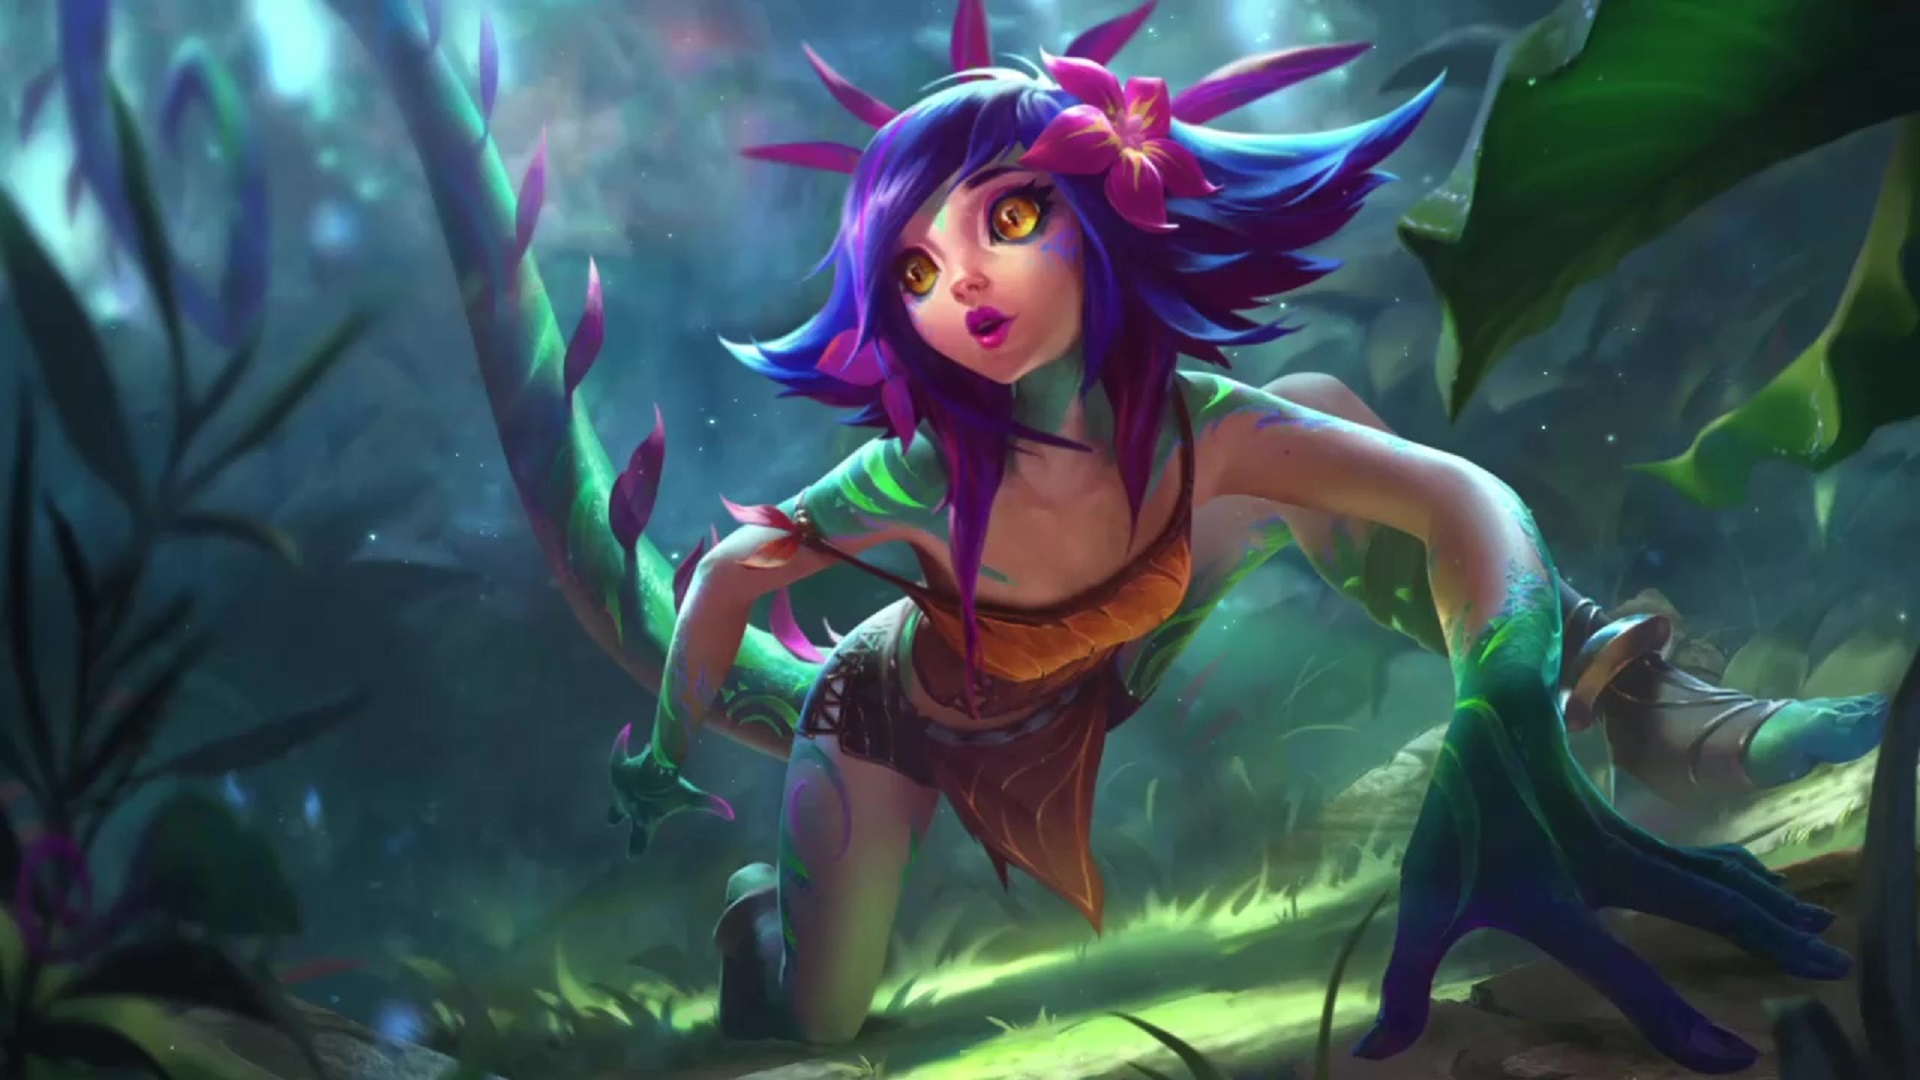 16 League Of Legends Live Wallpapers, Animated Wallpapers - MoeWalls